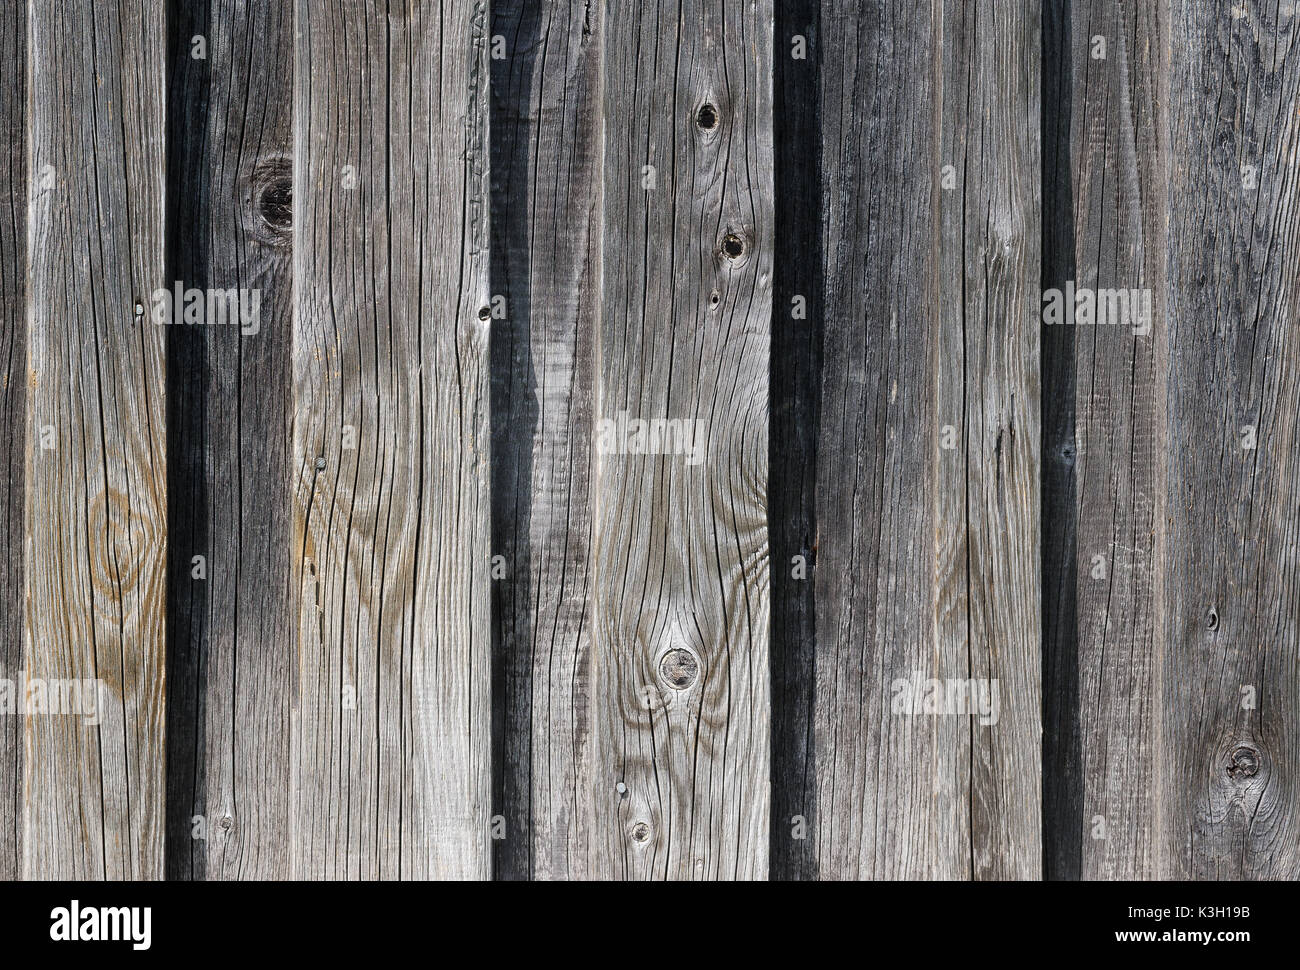 Weathered old wooden wall detail. Simple gray boards with knotholes and coarse grain nailed together. Outdoor. Backgrounds. Photo. Stock Photo